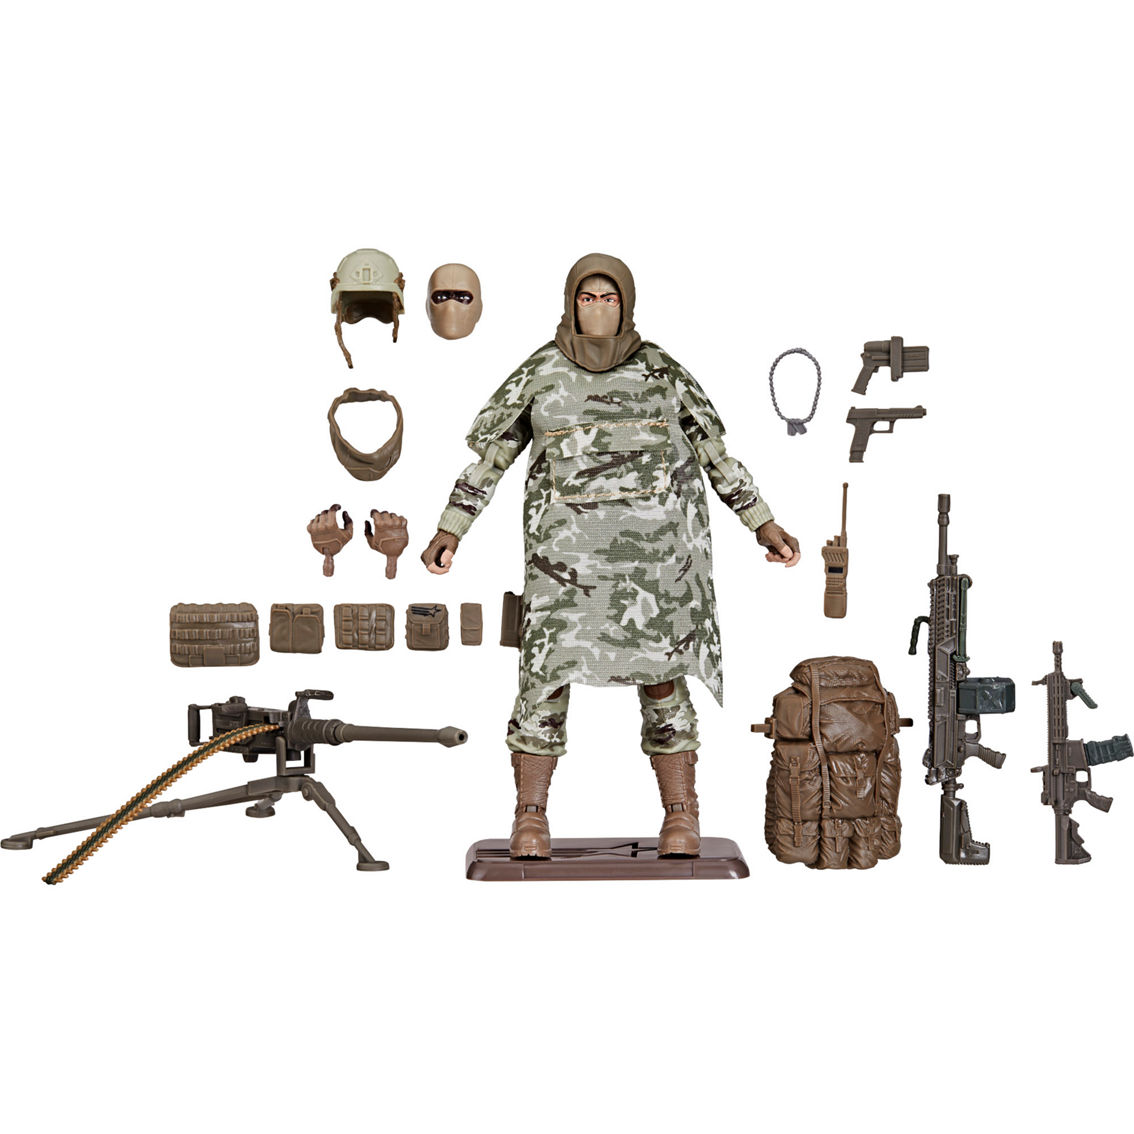 Hasbro G.I. Joe Classified Series 60th Anniversary Action Soldier, Infantry - Image 2 of 5